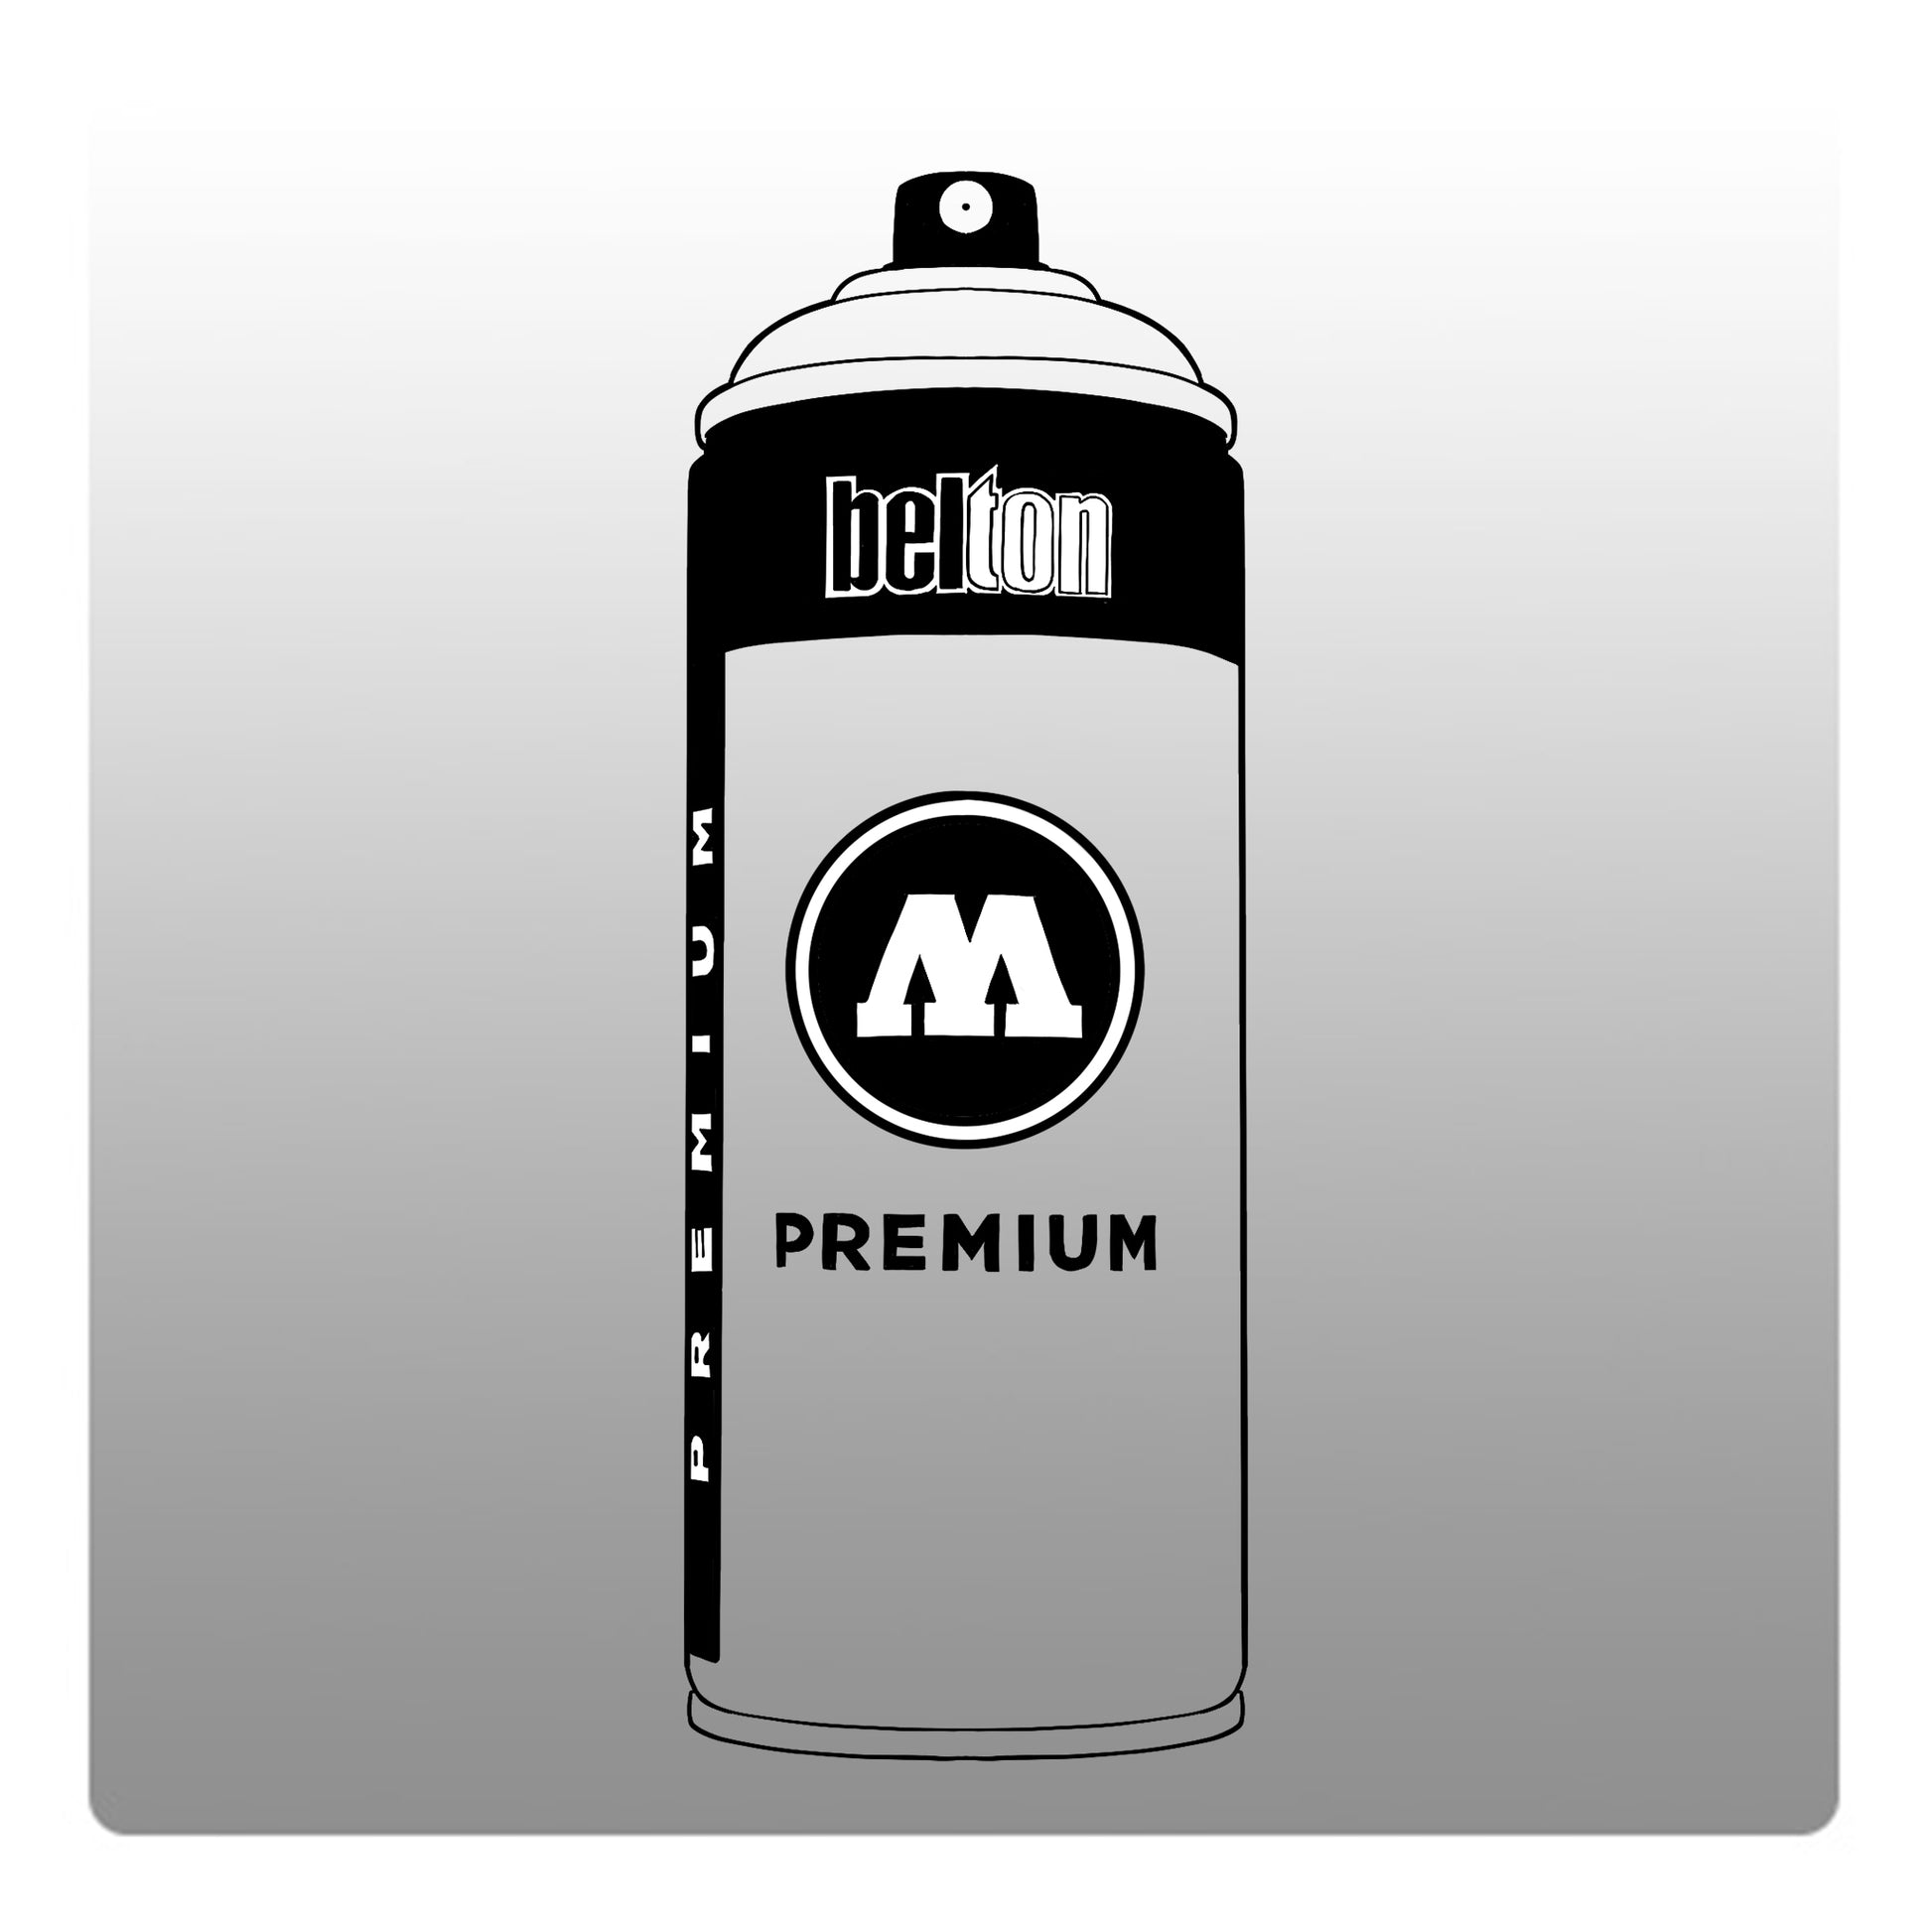 A line drawing of a spray paint can with a transparent, grey color swatch.